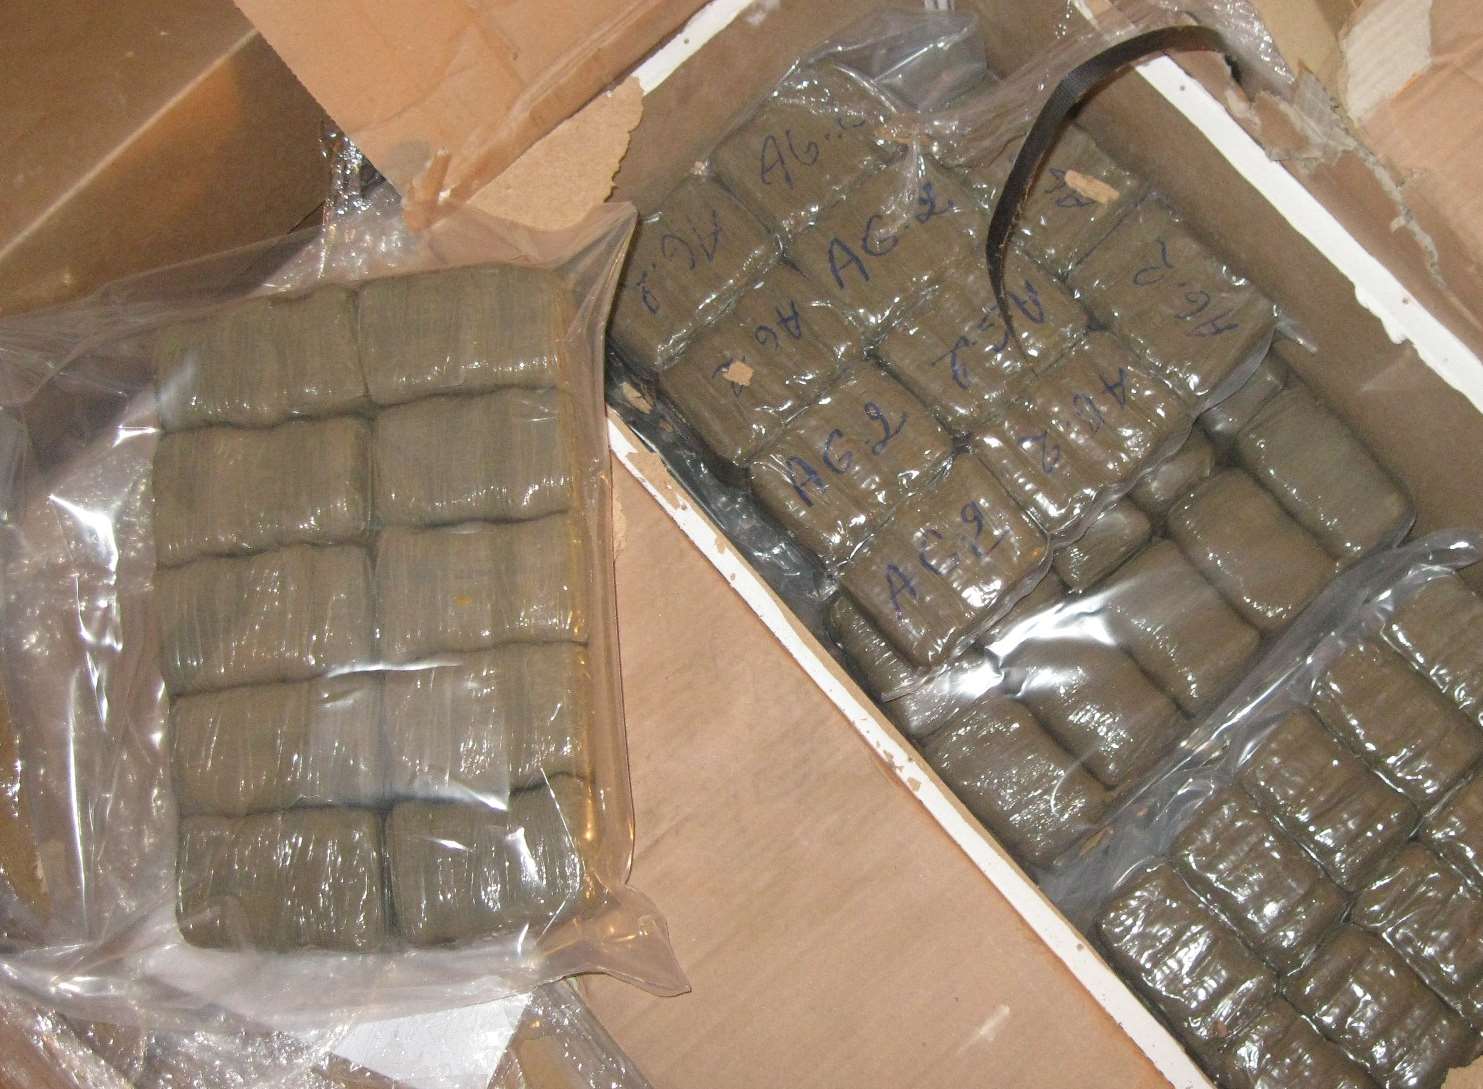 The group smuggled an excess of 28 tonnes of cannabis over a seven year period.